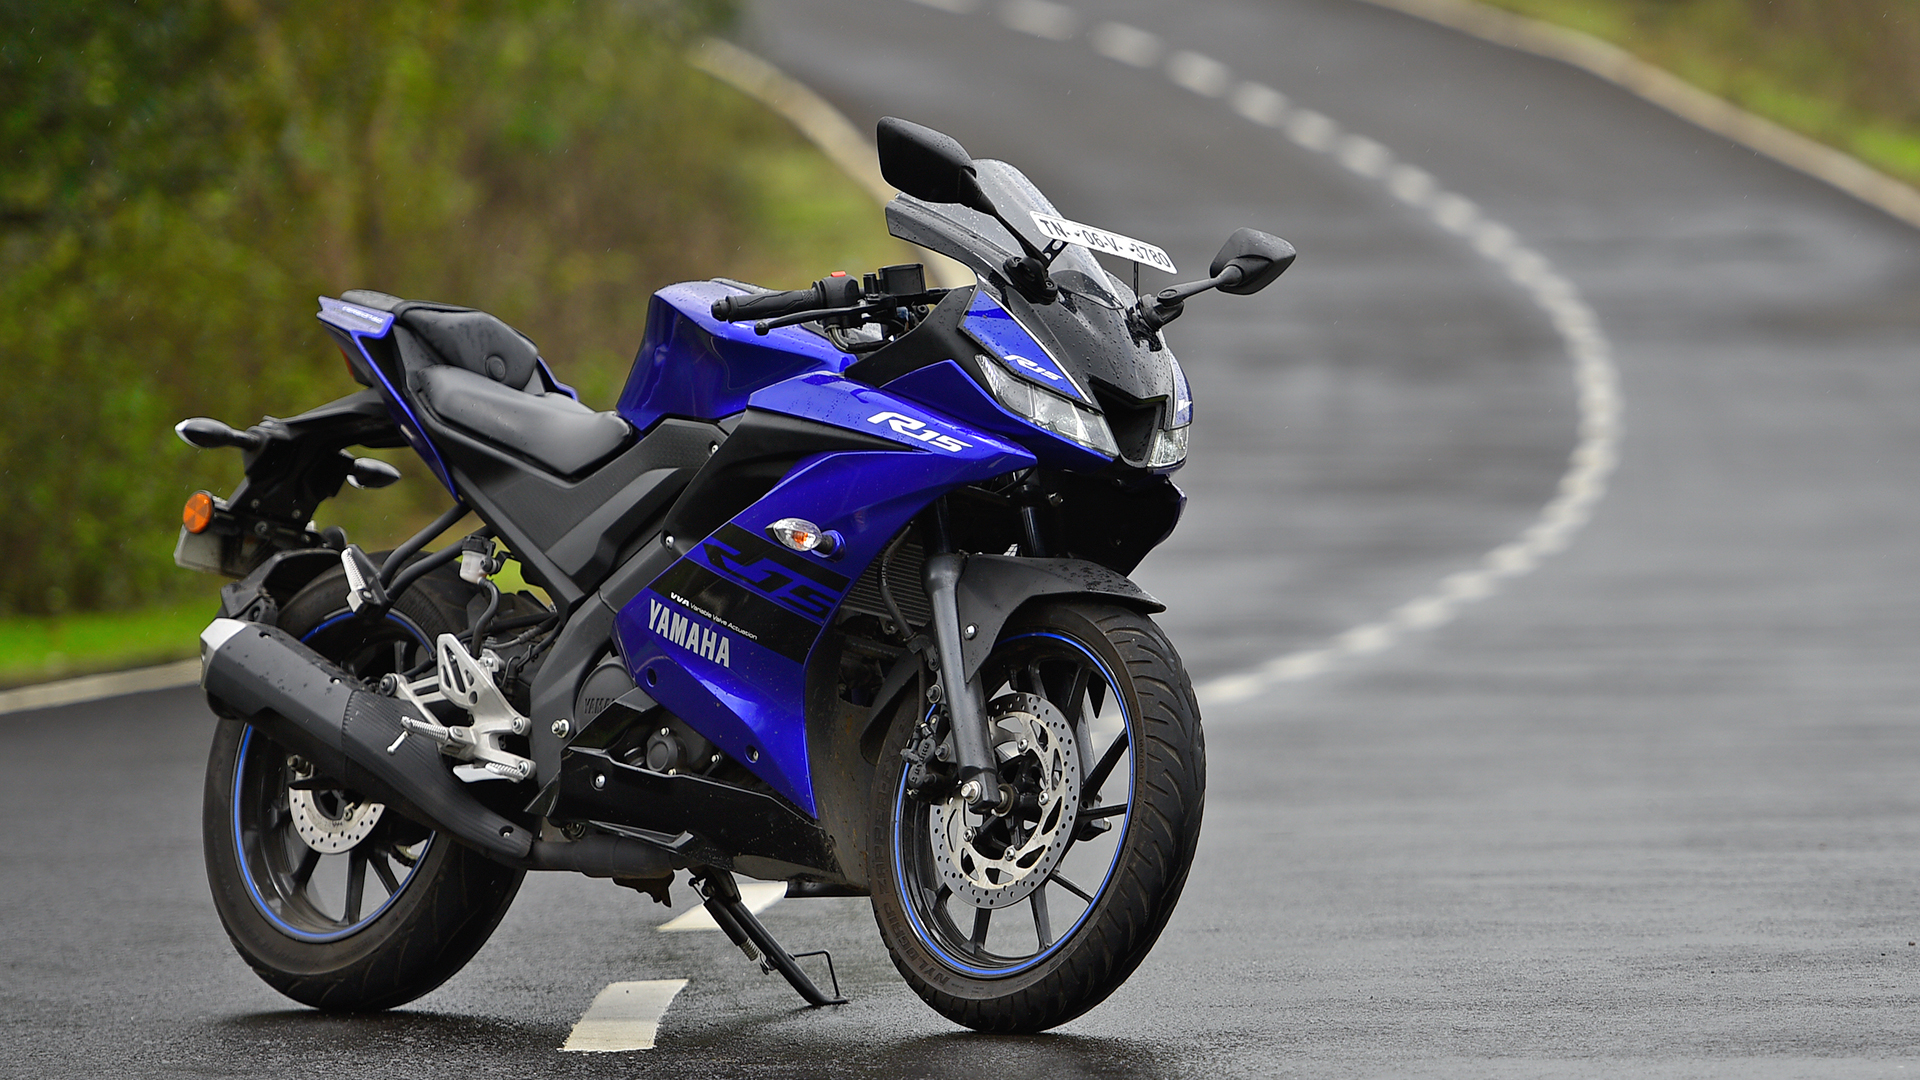 Yamaha YZF-R15 V3.0 2018 - Price, Mileage, Reviews, Specification